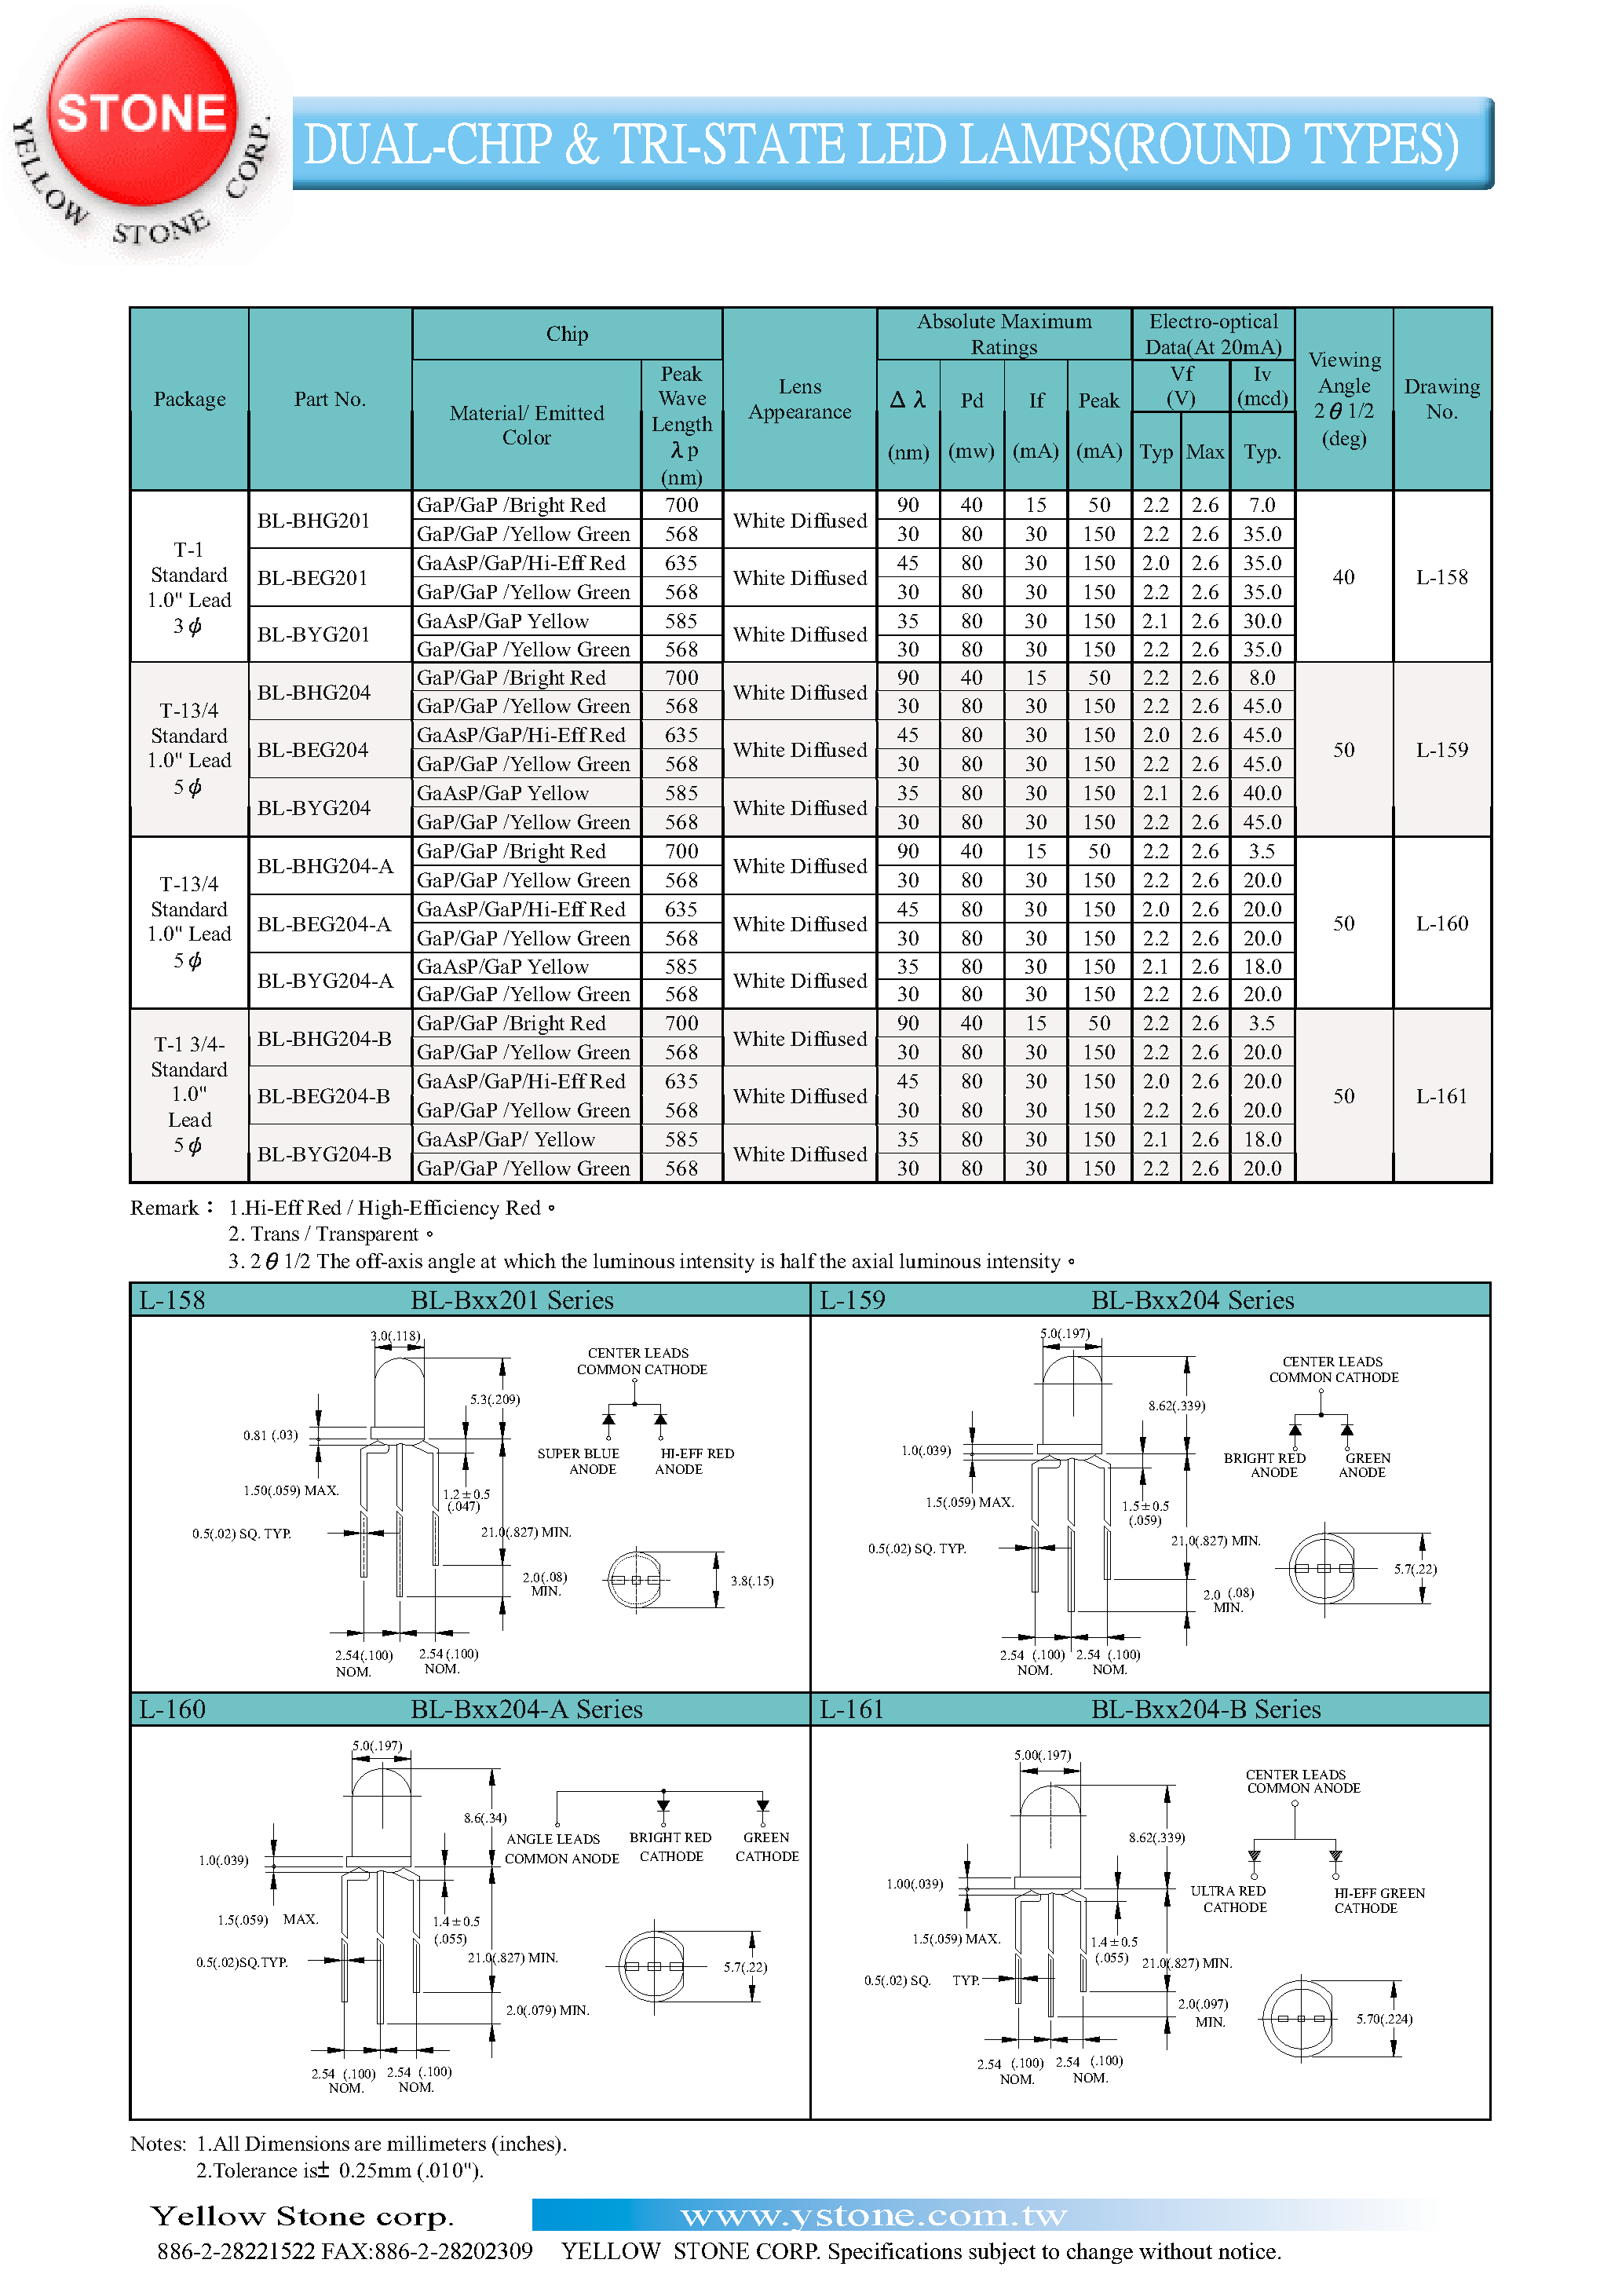 Datasheet BL-BEG204-B - DUAL CHIP TRI STATE LED LAMPS page 1